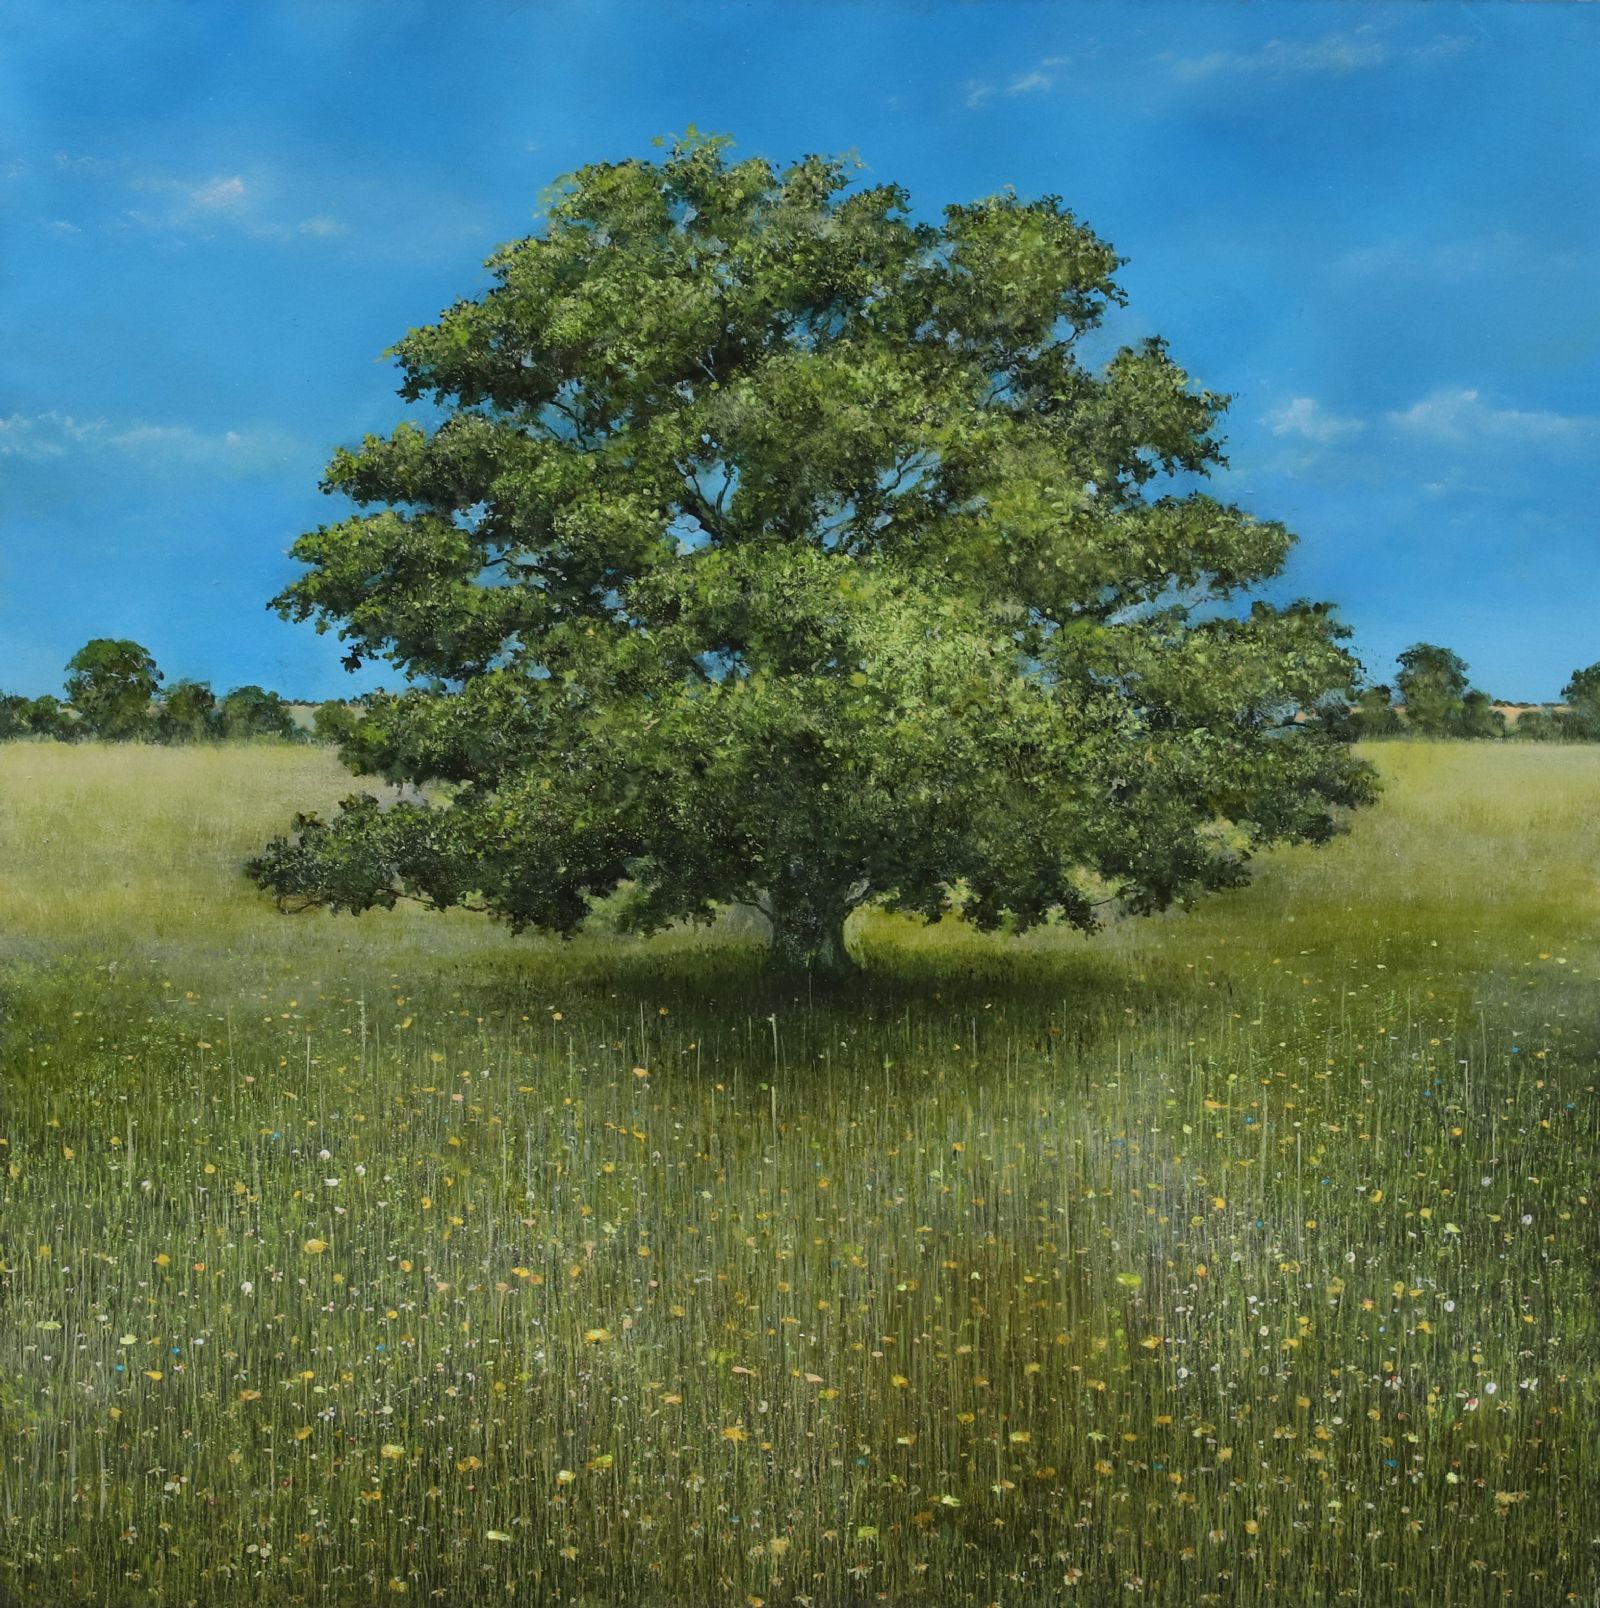  - The Wise Oak Protecting Buttercups